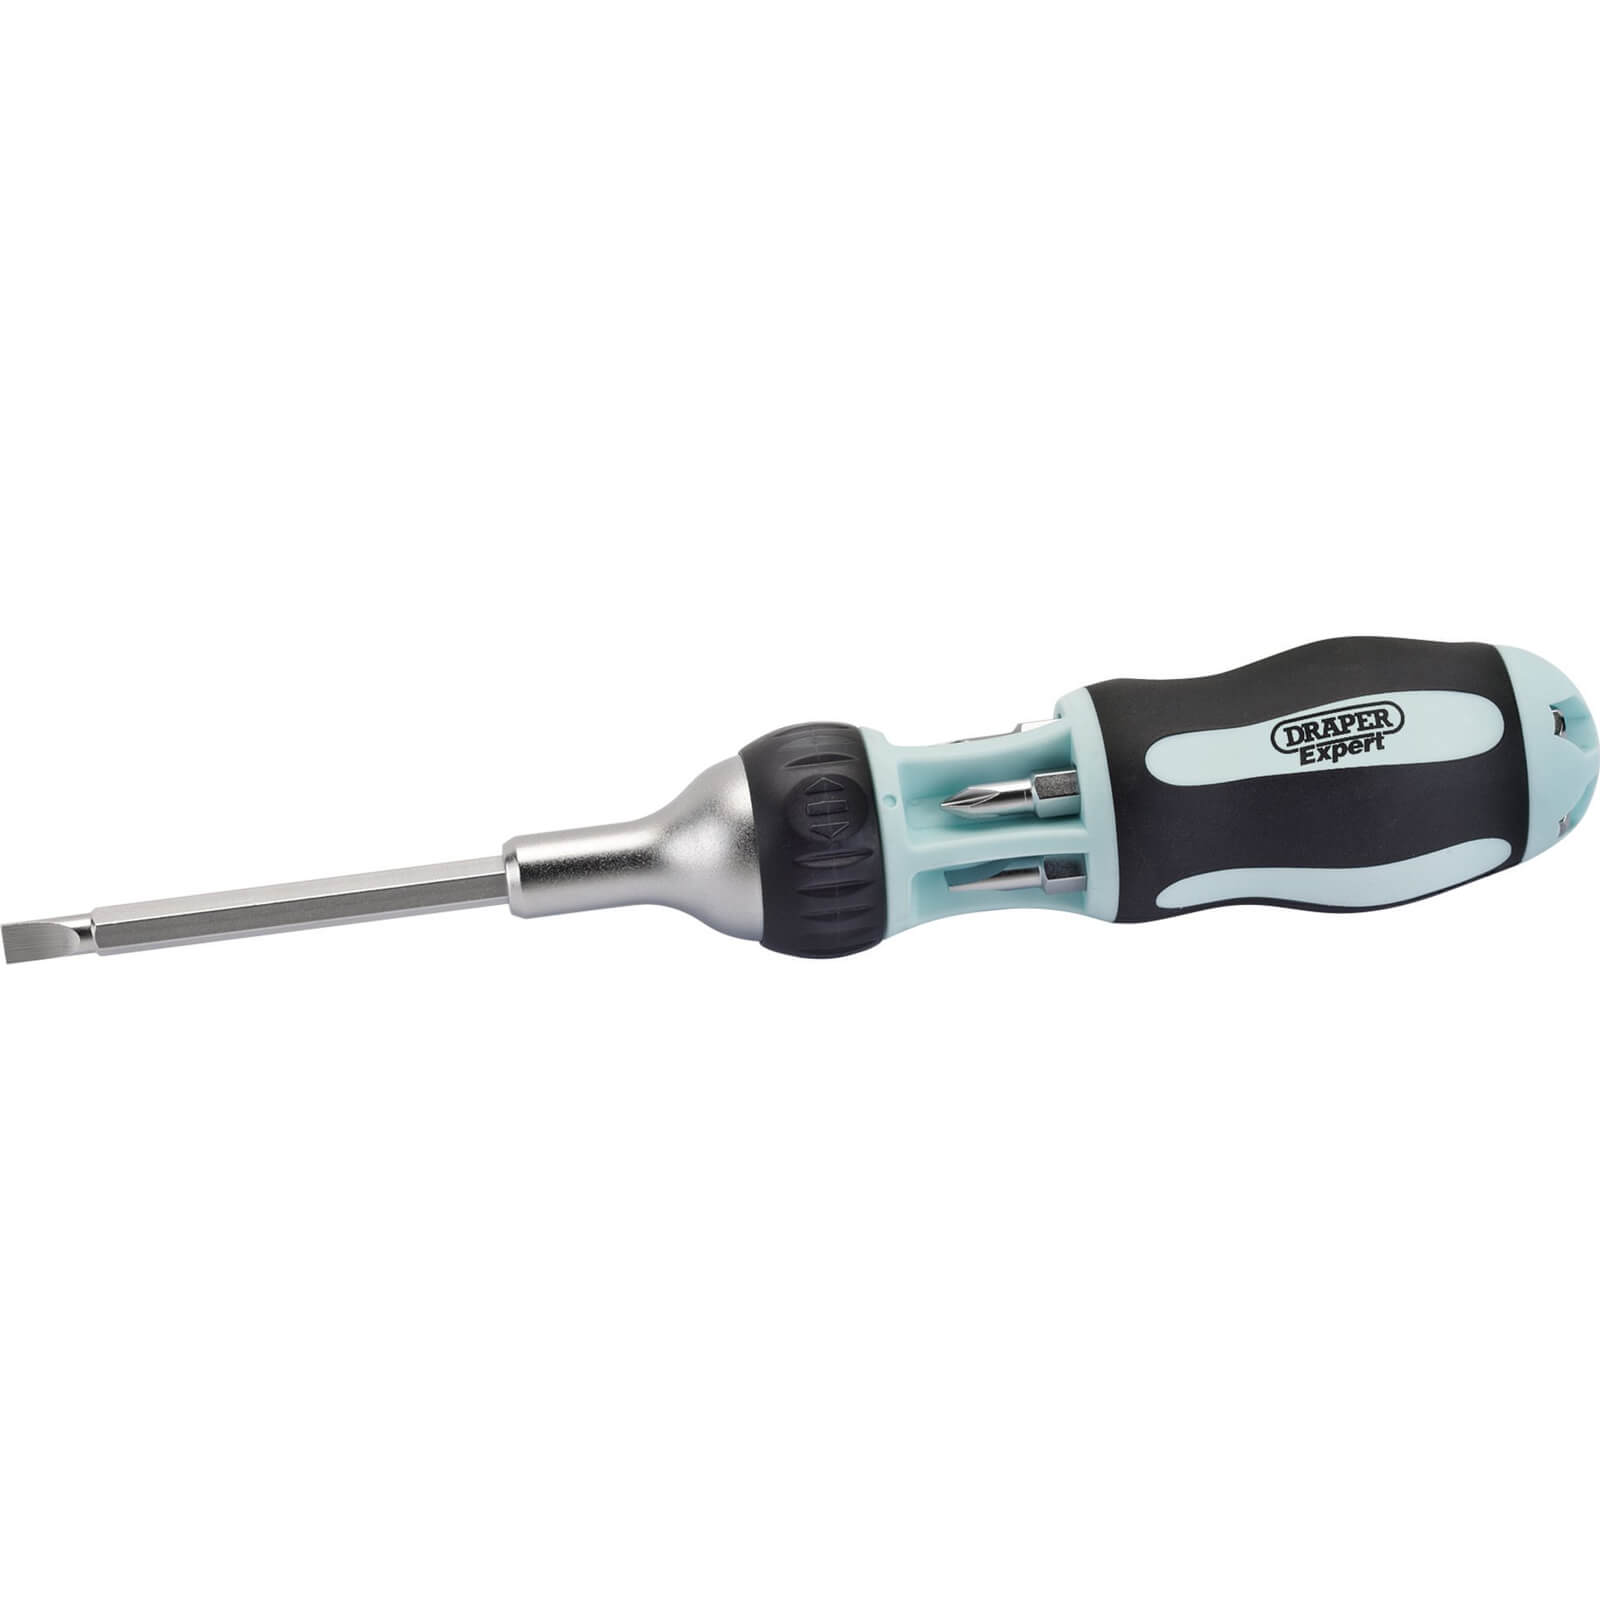 Image of Draper Soft Grip 7 In 1 Ratcheting Screwdriver and Bit Set